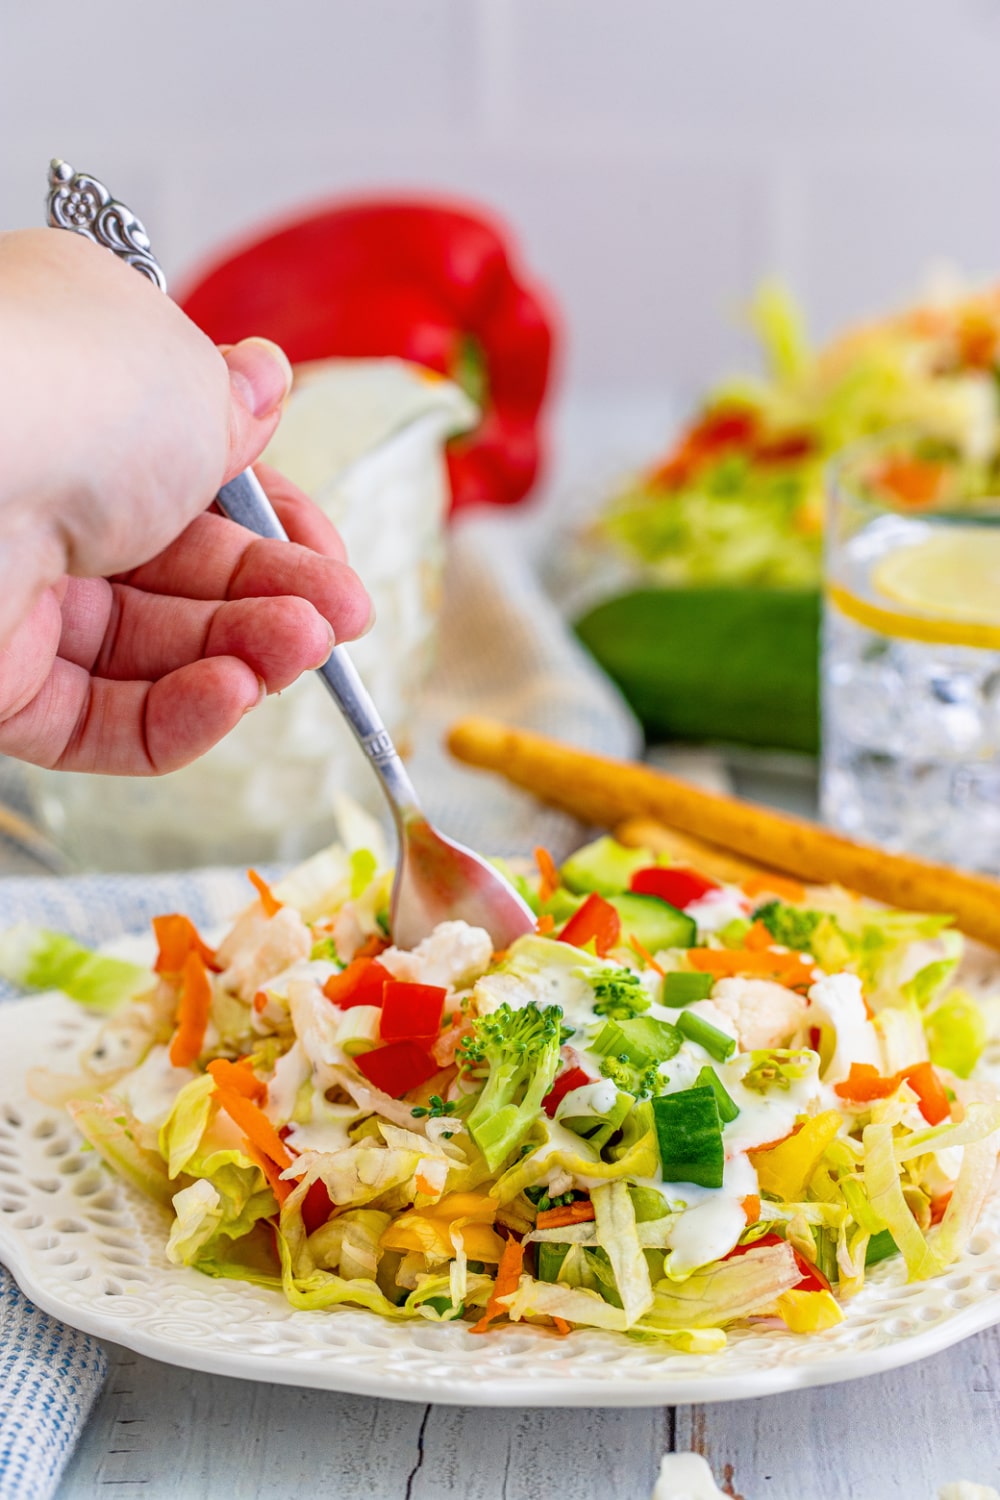 A female hand holds a fork stabbing a bite of salad from a white plate.